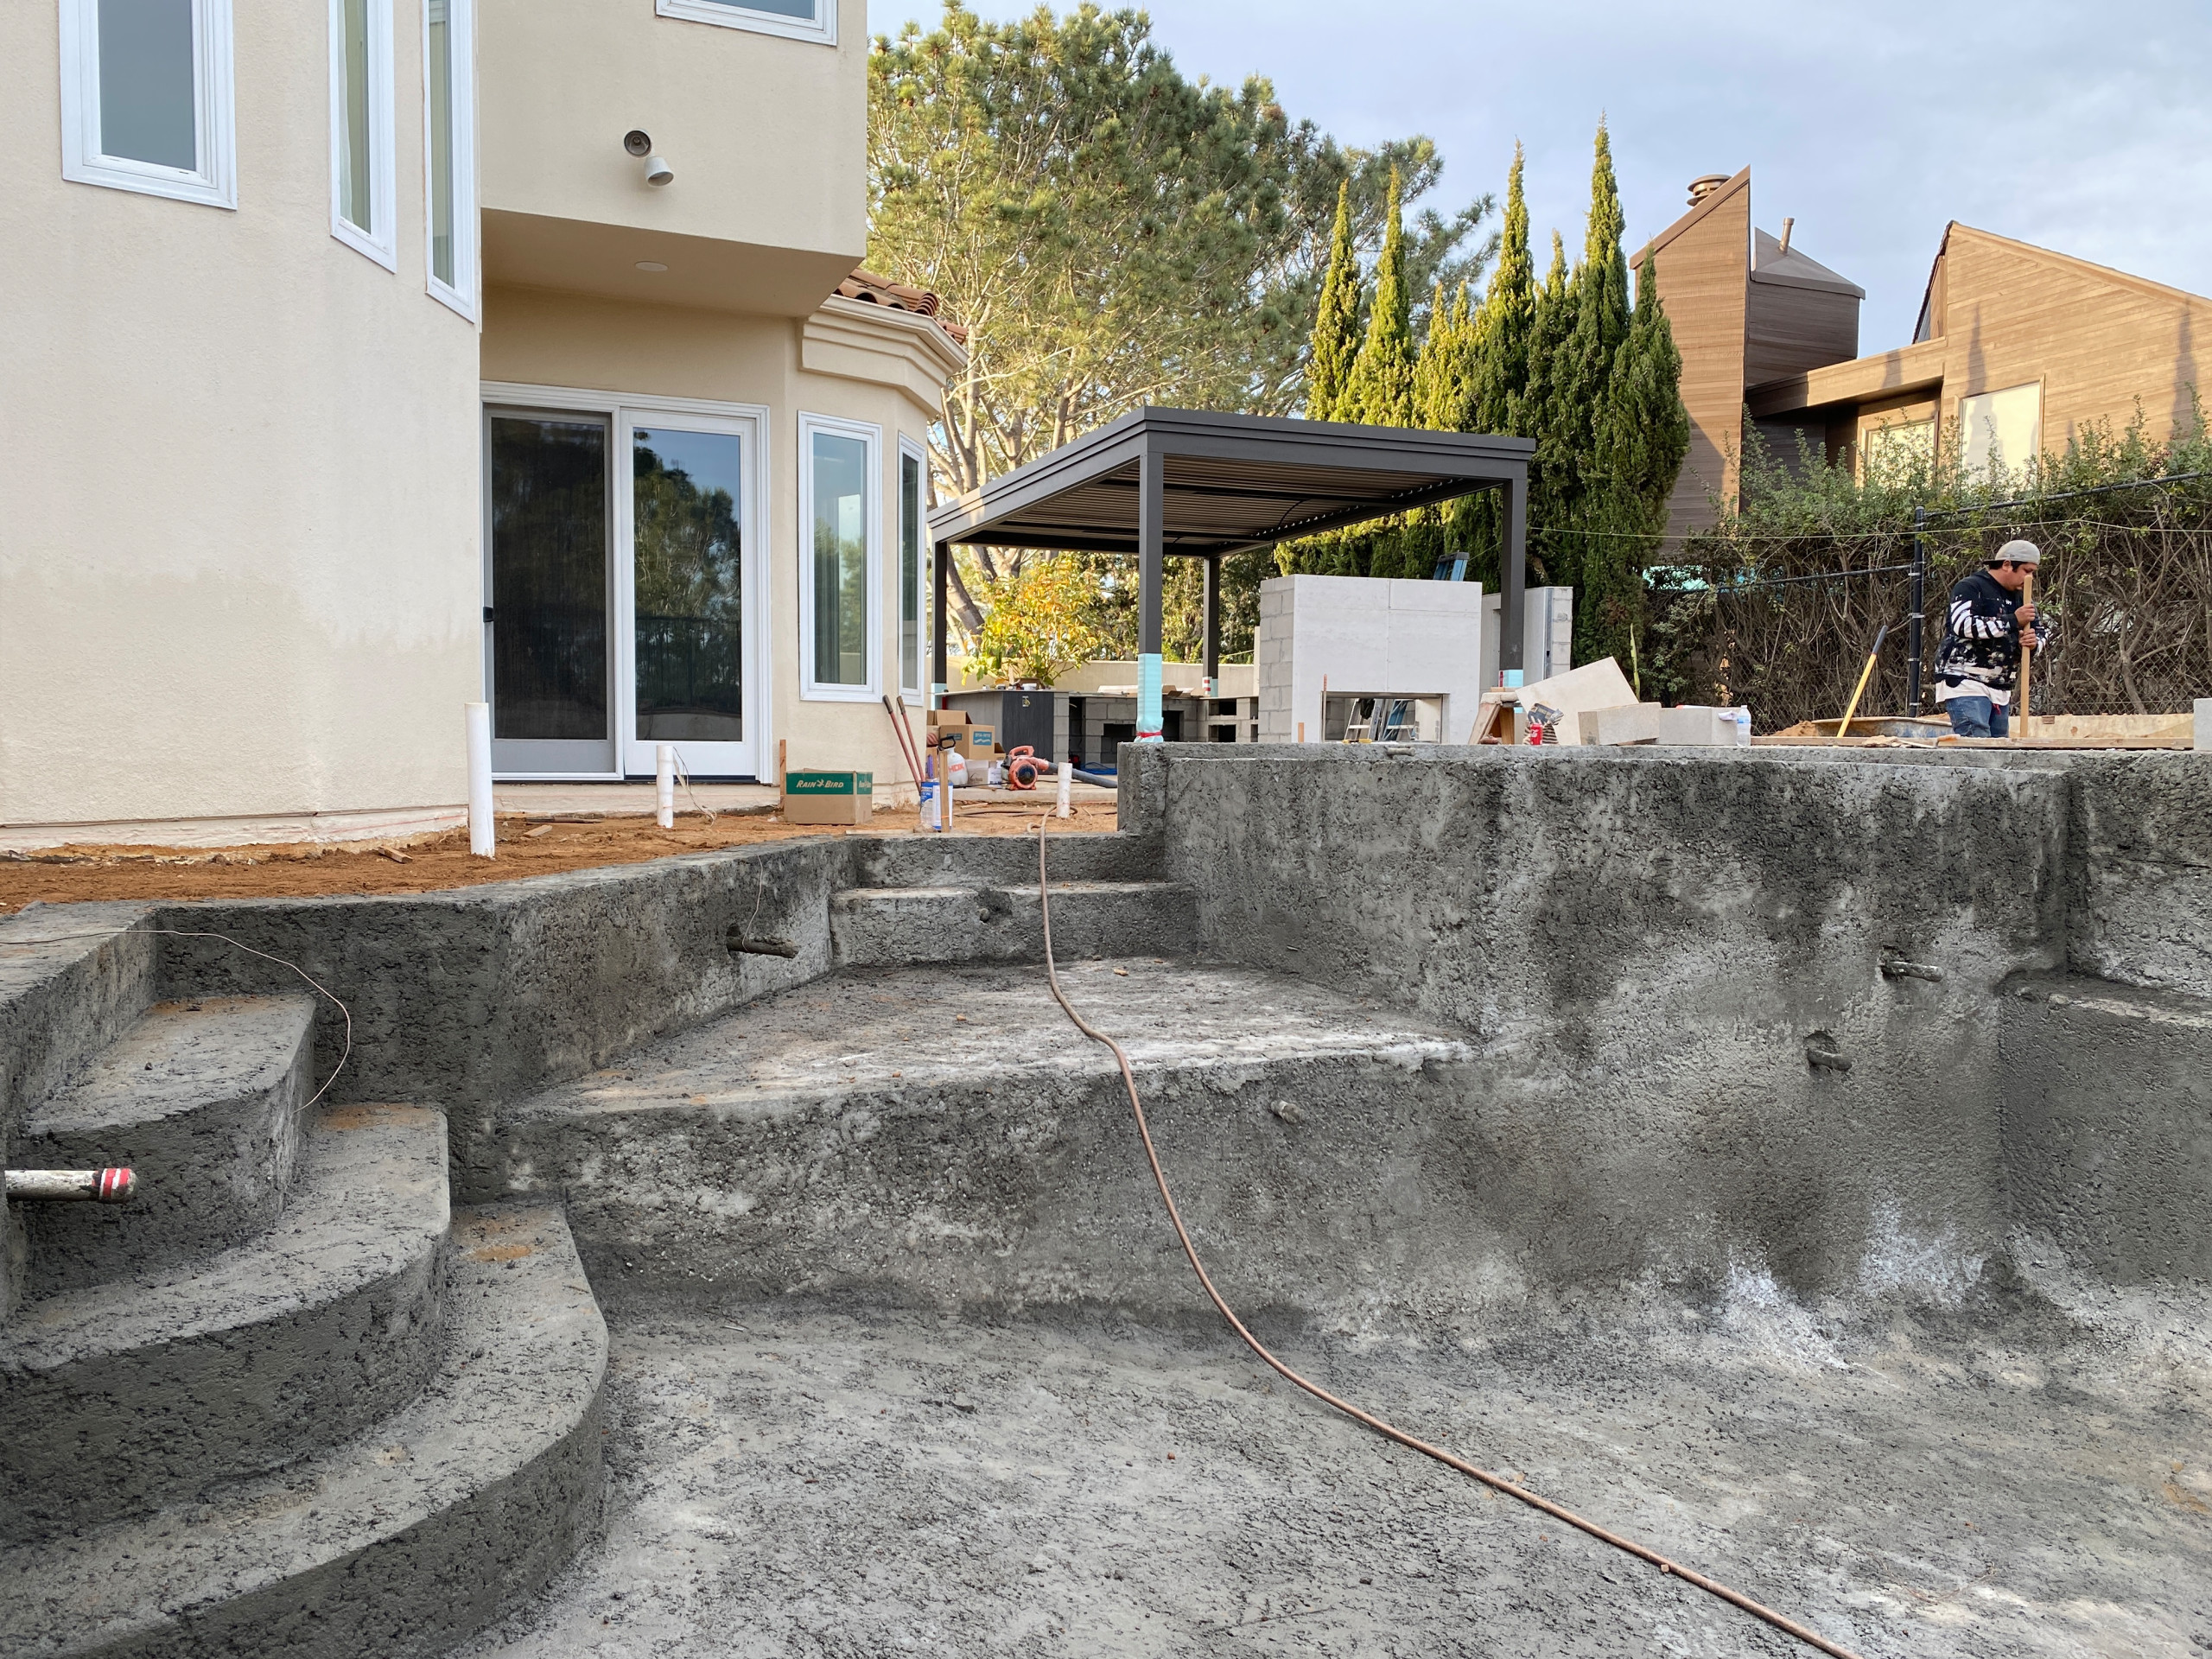 Pool Shotcrete Is In, Now Time For Coping!